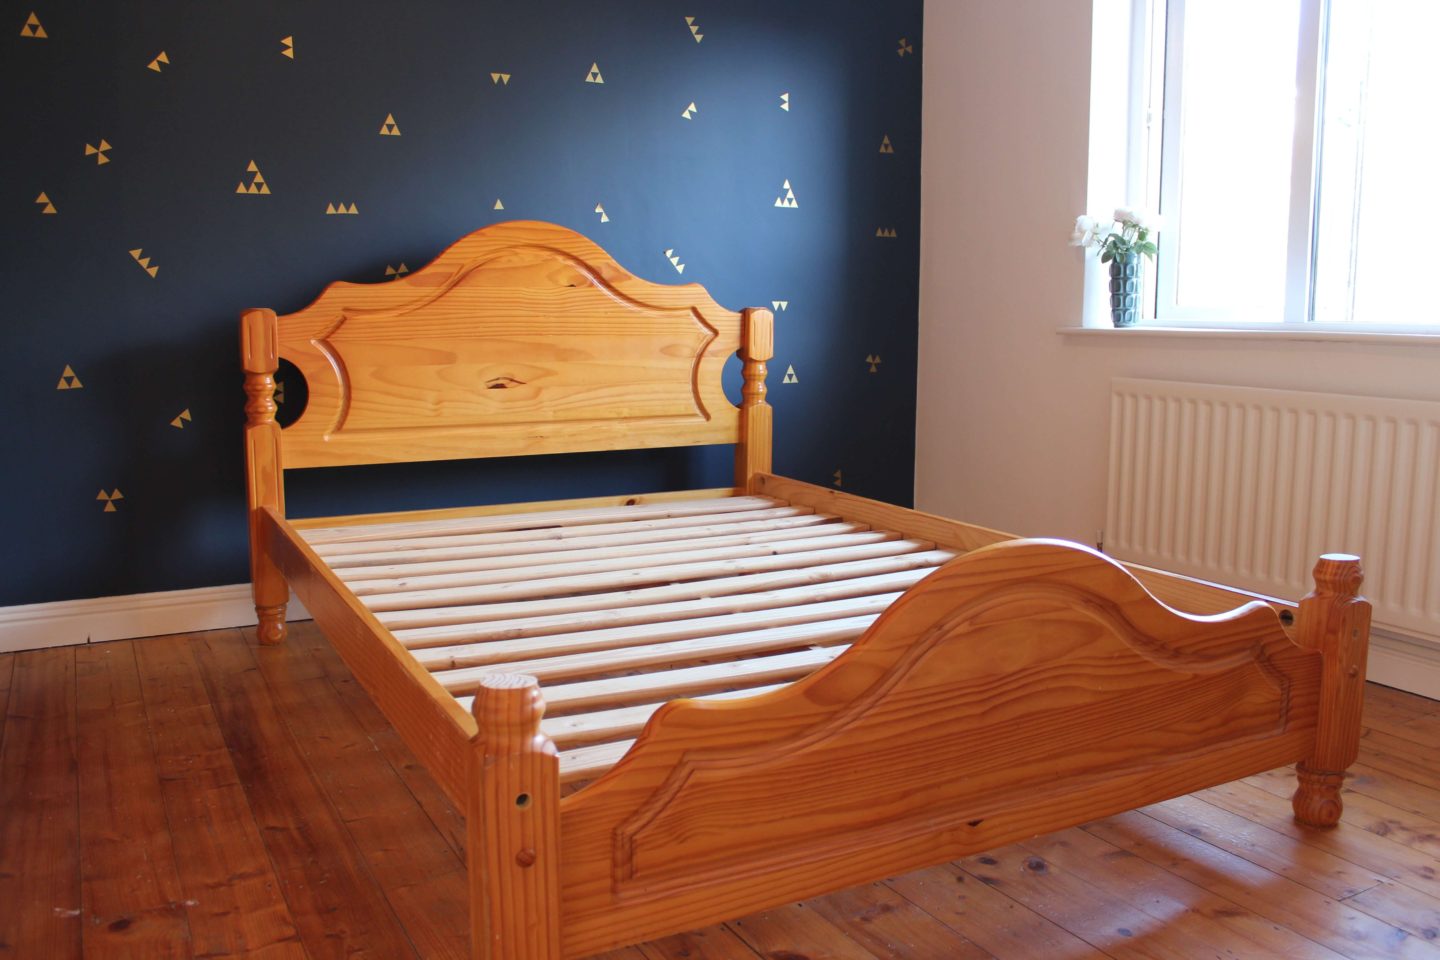 A guestroom with navy wall, gold decals and a pine bed.